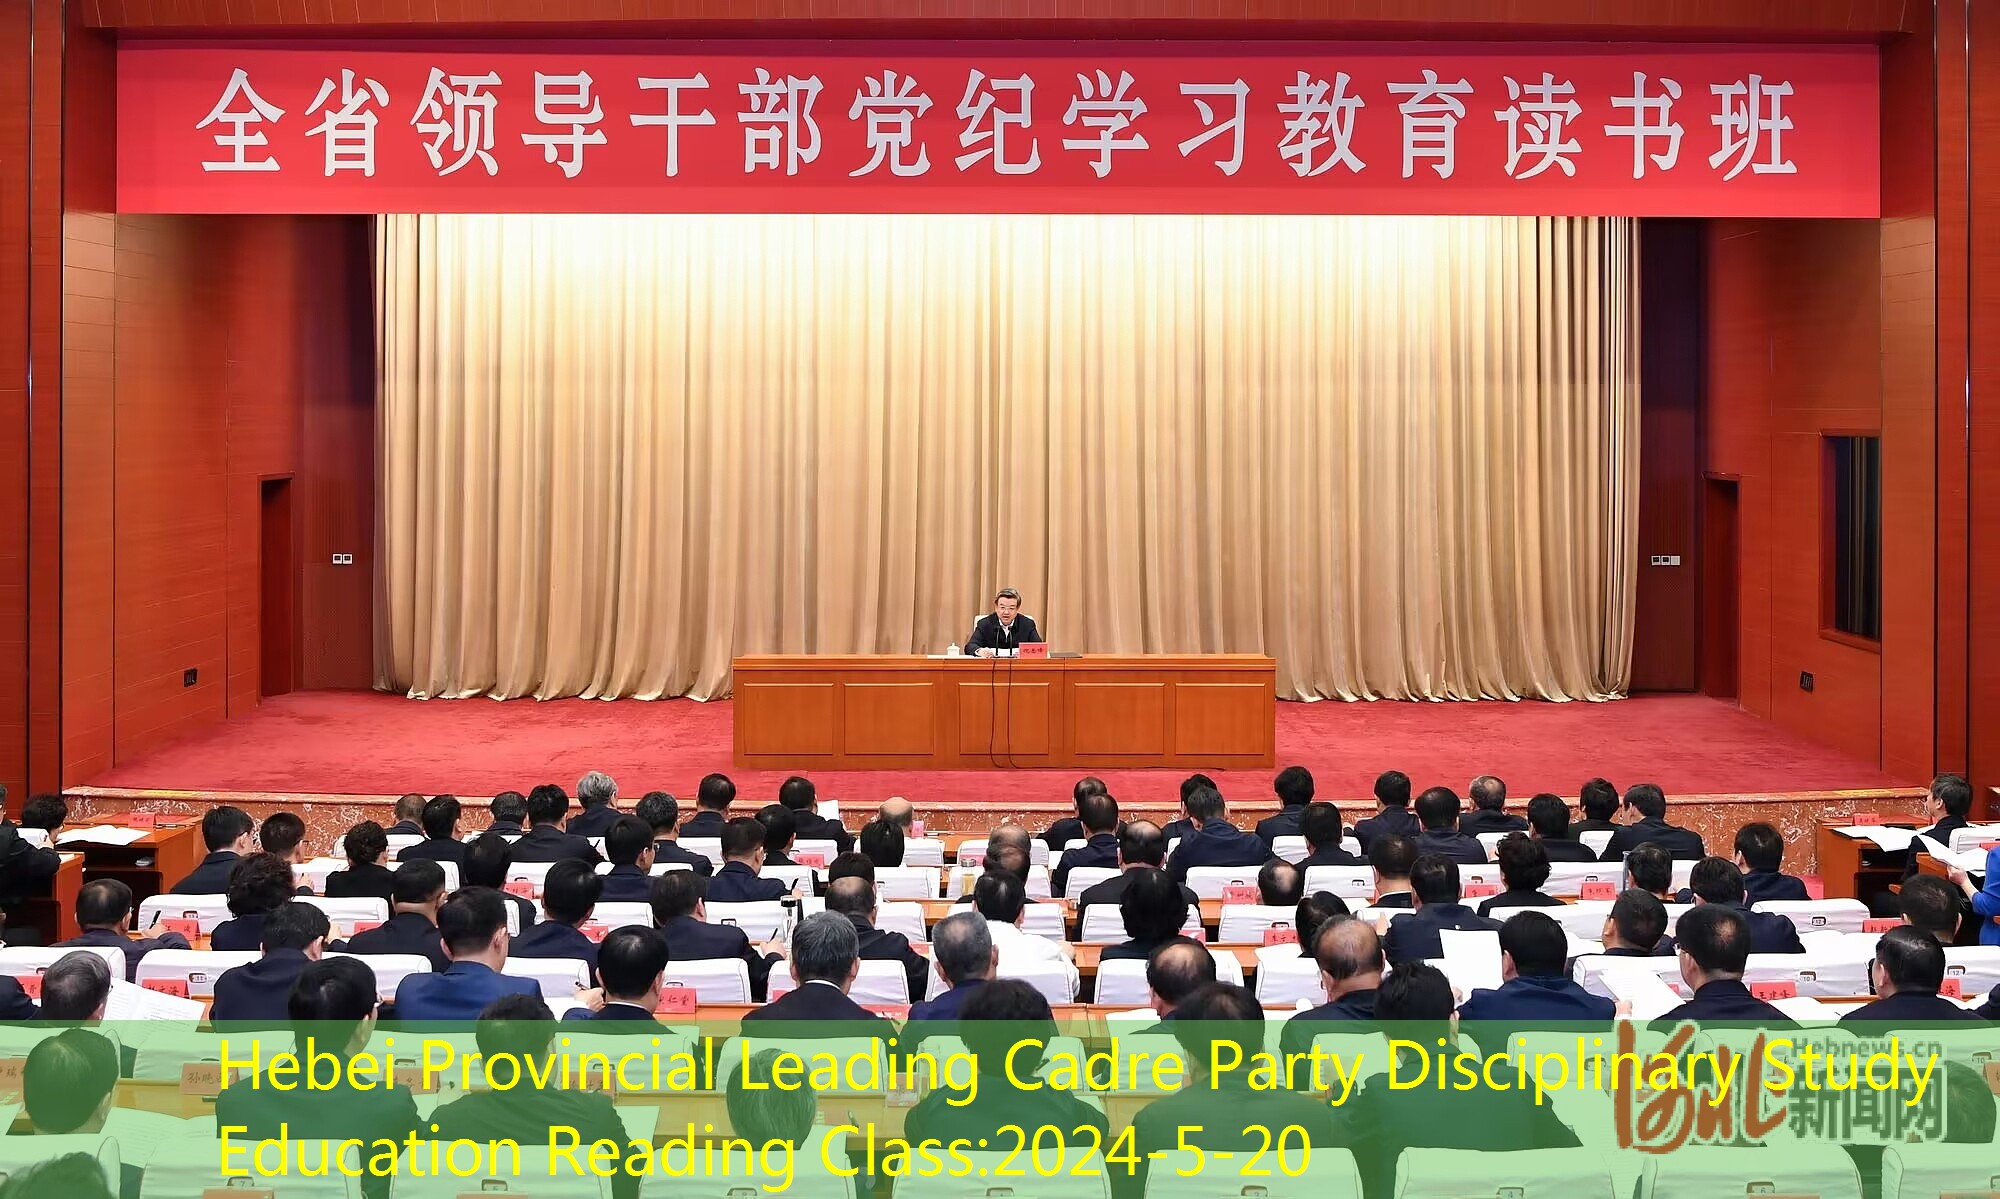 Hebei Provincial Leading Cadre Party Disciplinary Study Education Reading Class